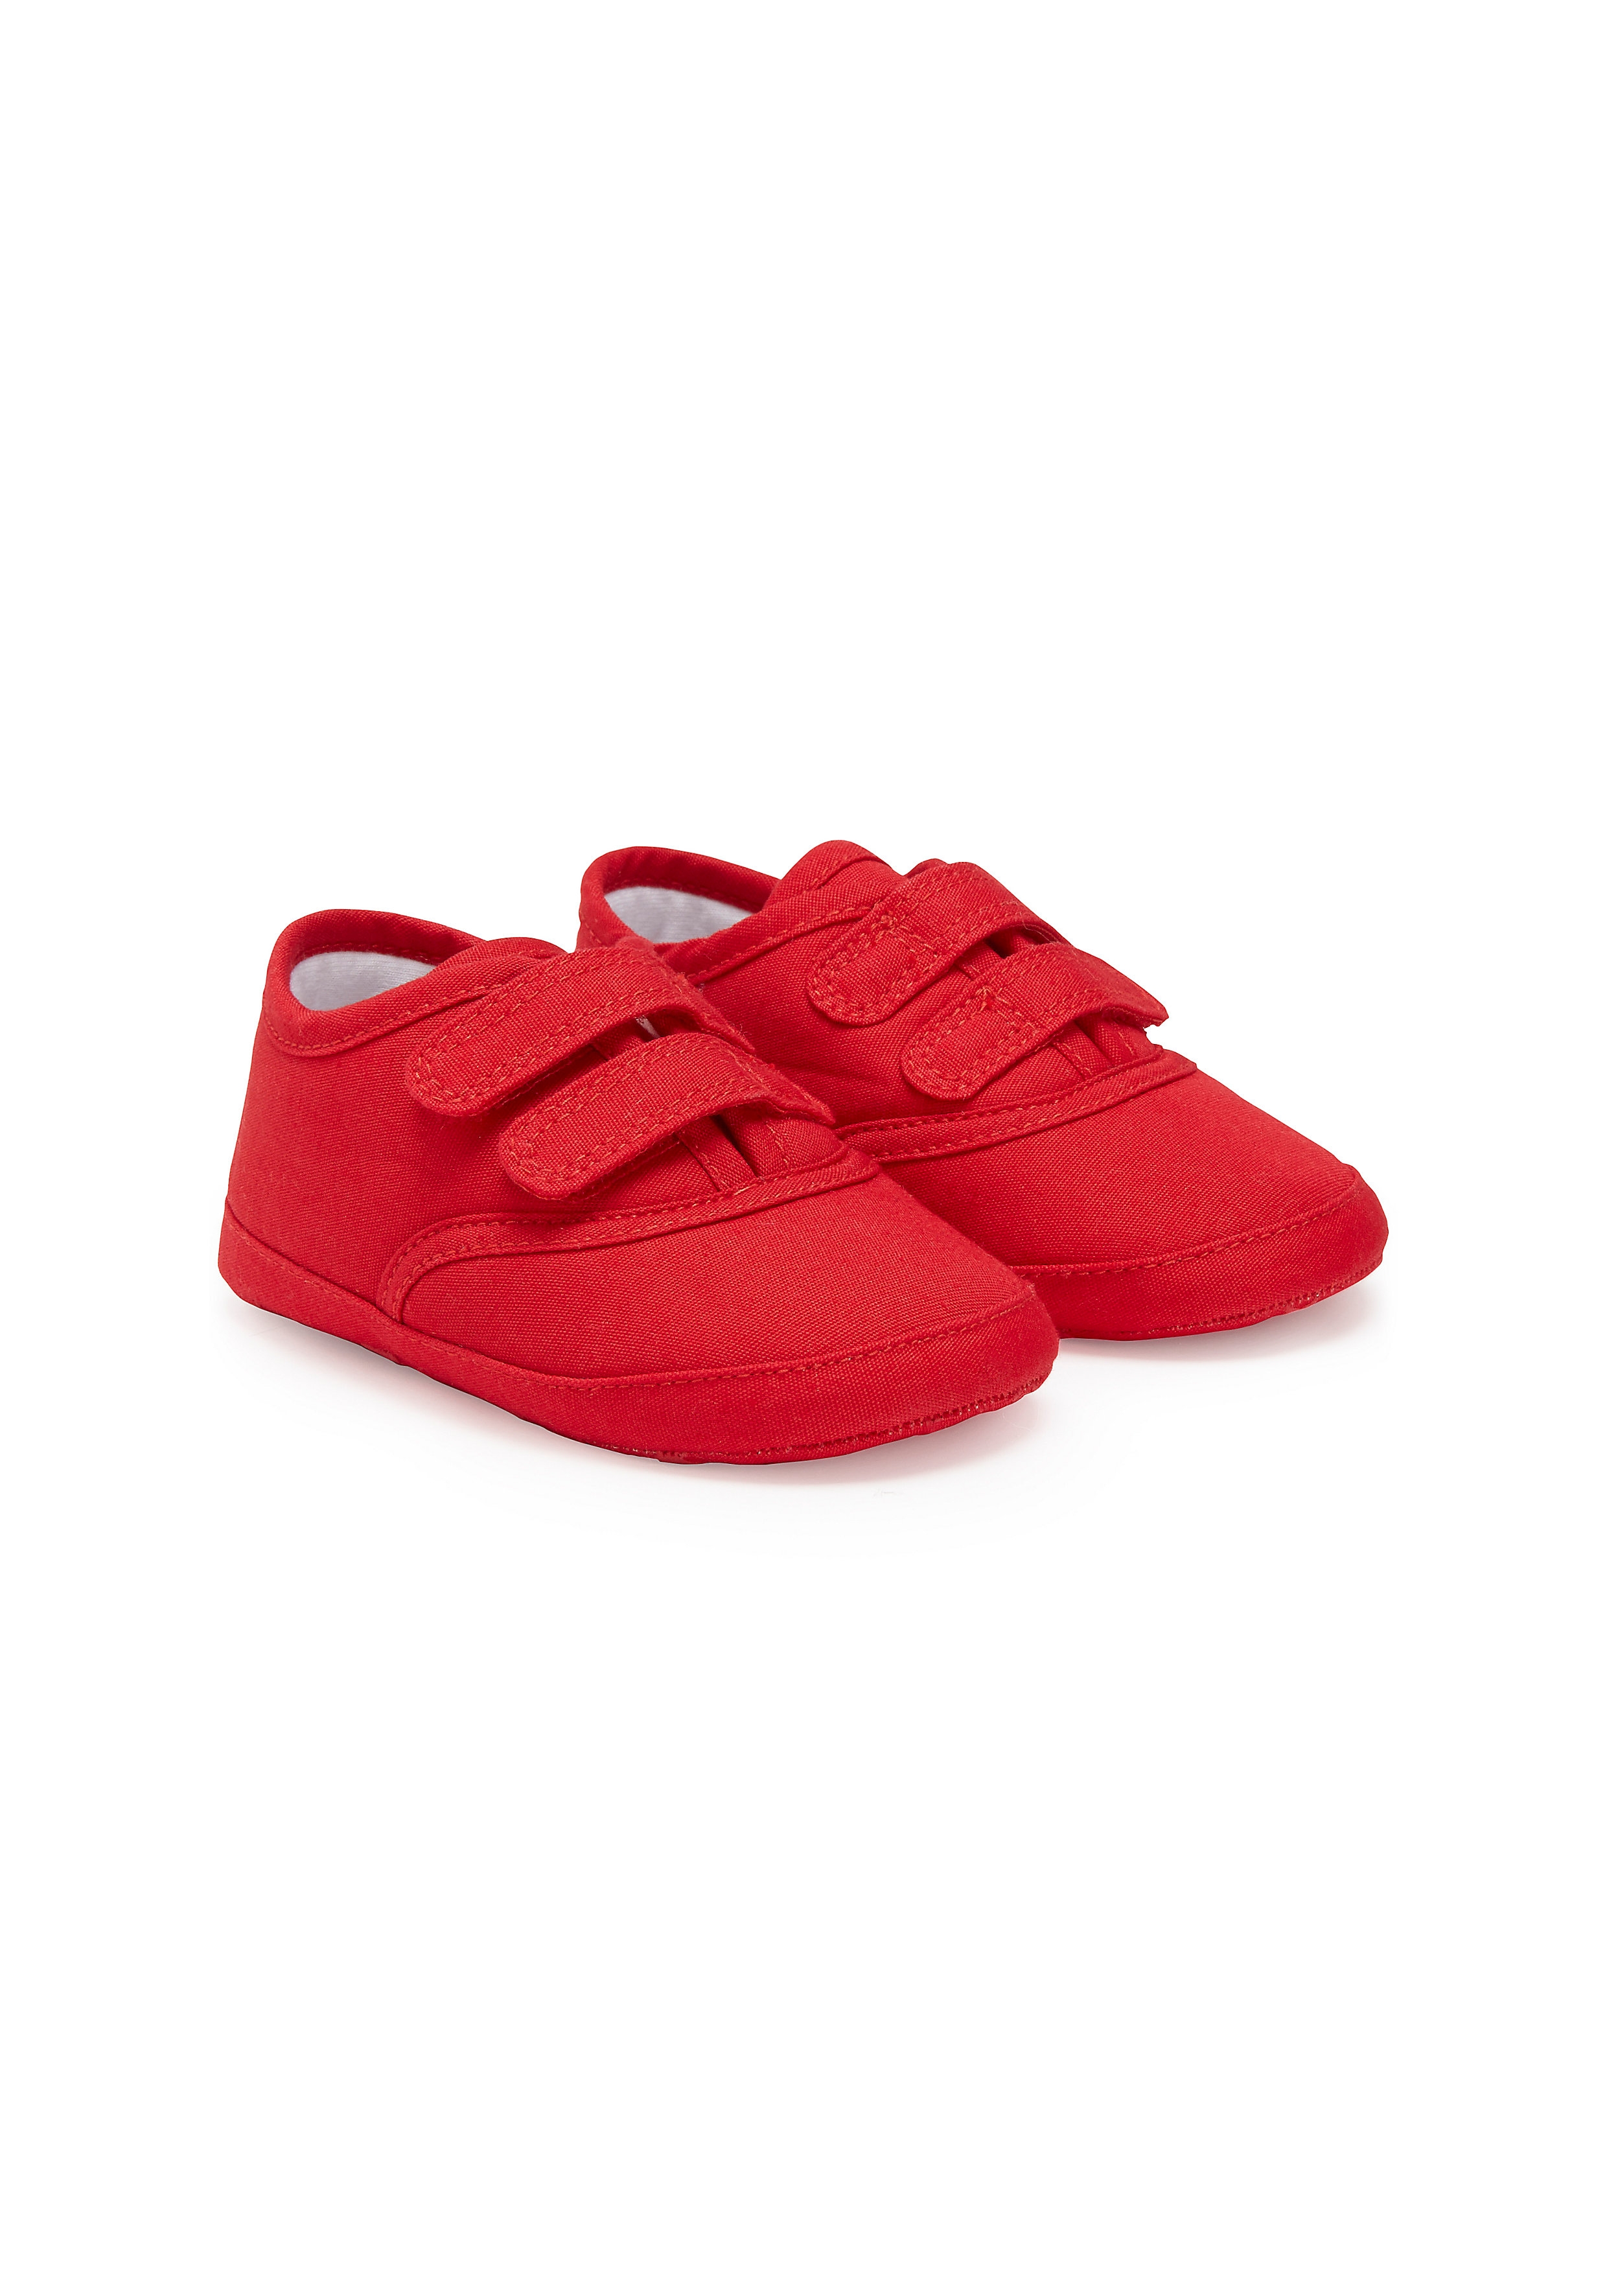 Mothercare | Boys Pram Shoes - Red 0